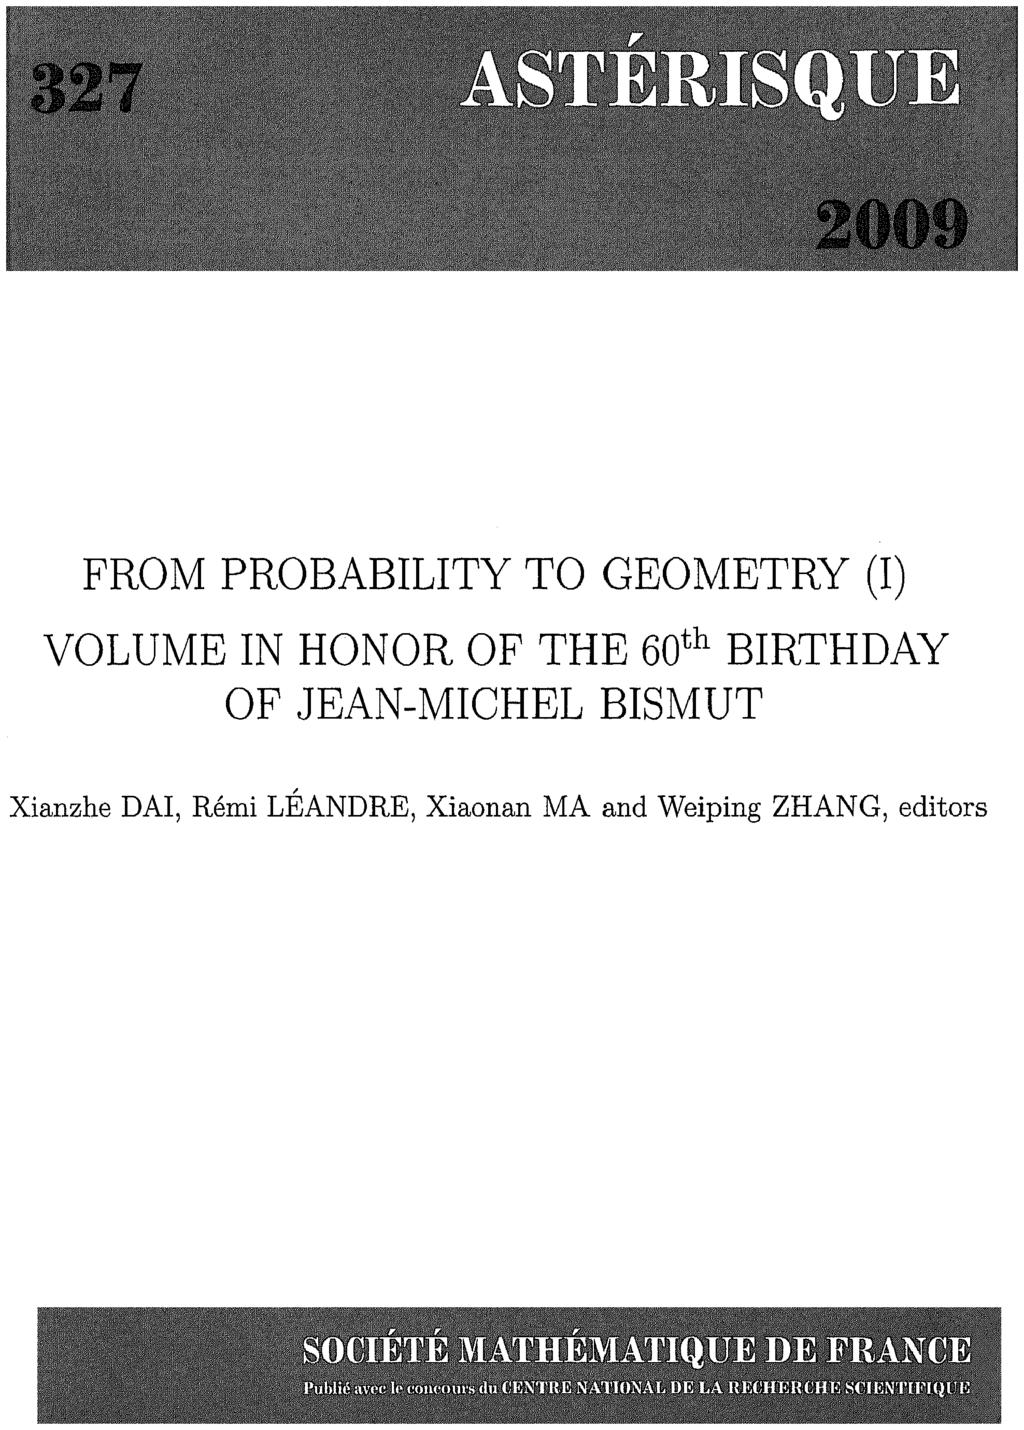 FROM PROBABILITY TO GEOMETRY (I) VOLUME IN HONOR OF THE 60th BIRTHDAY OF